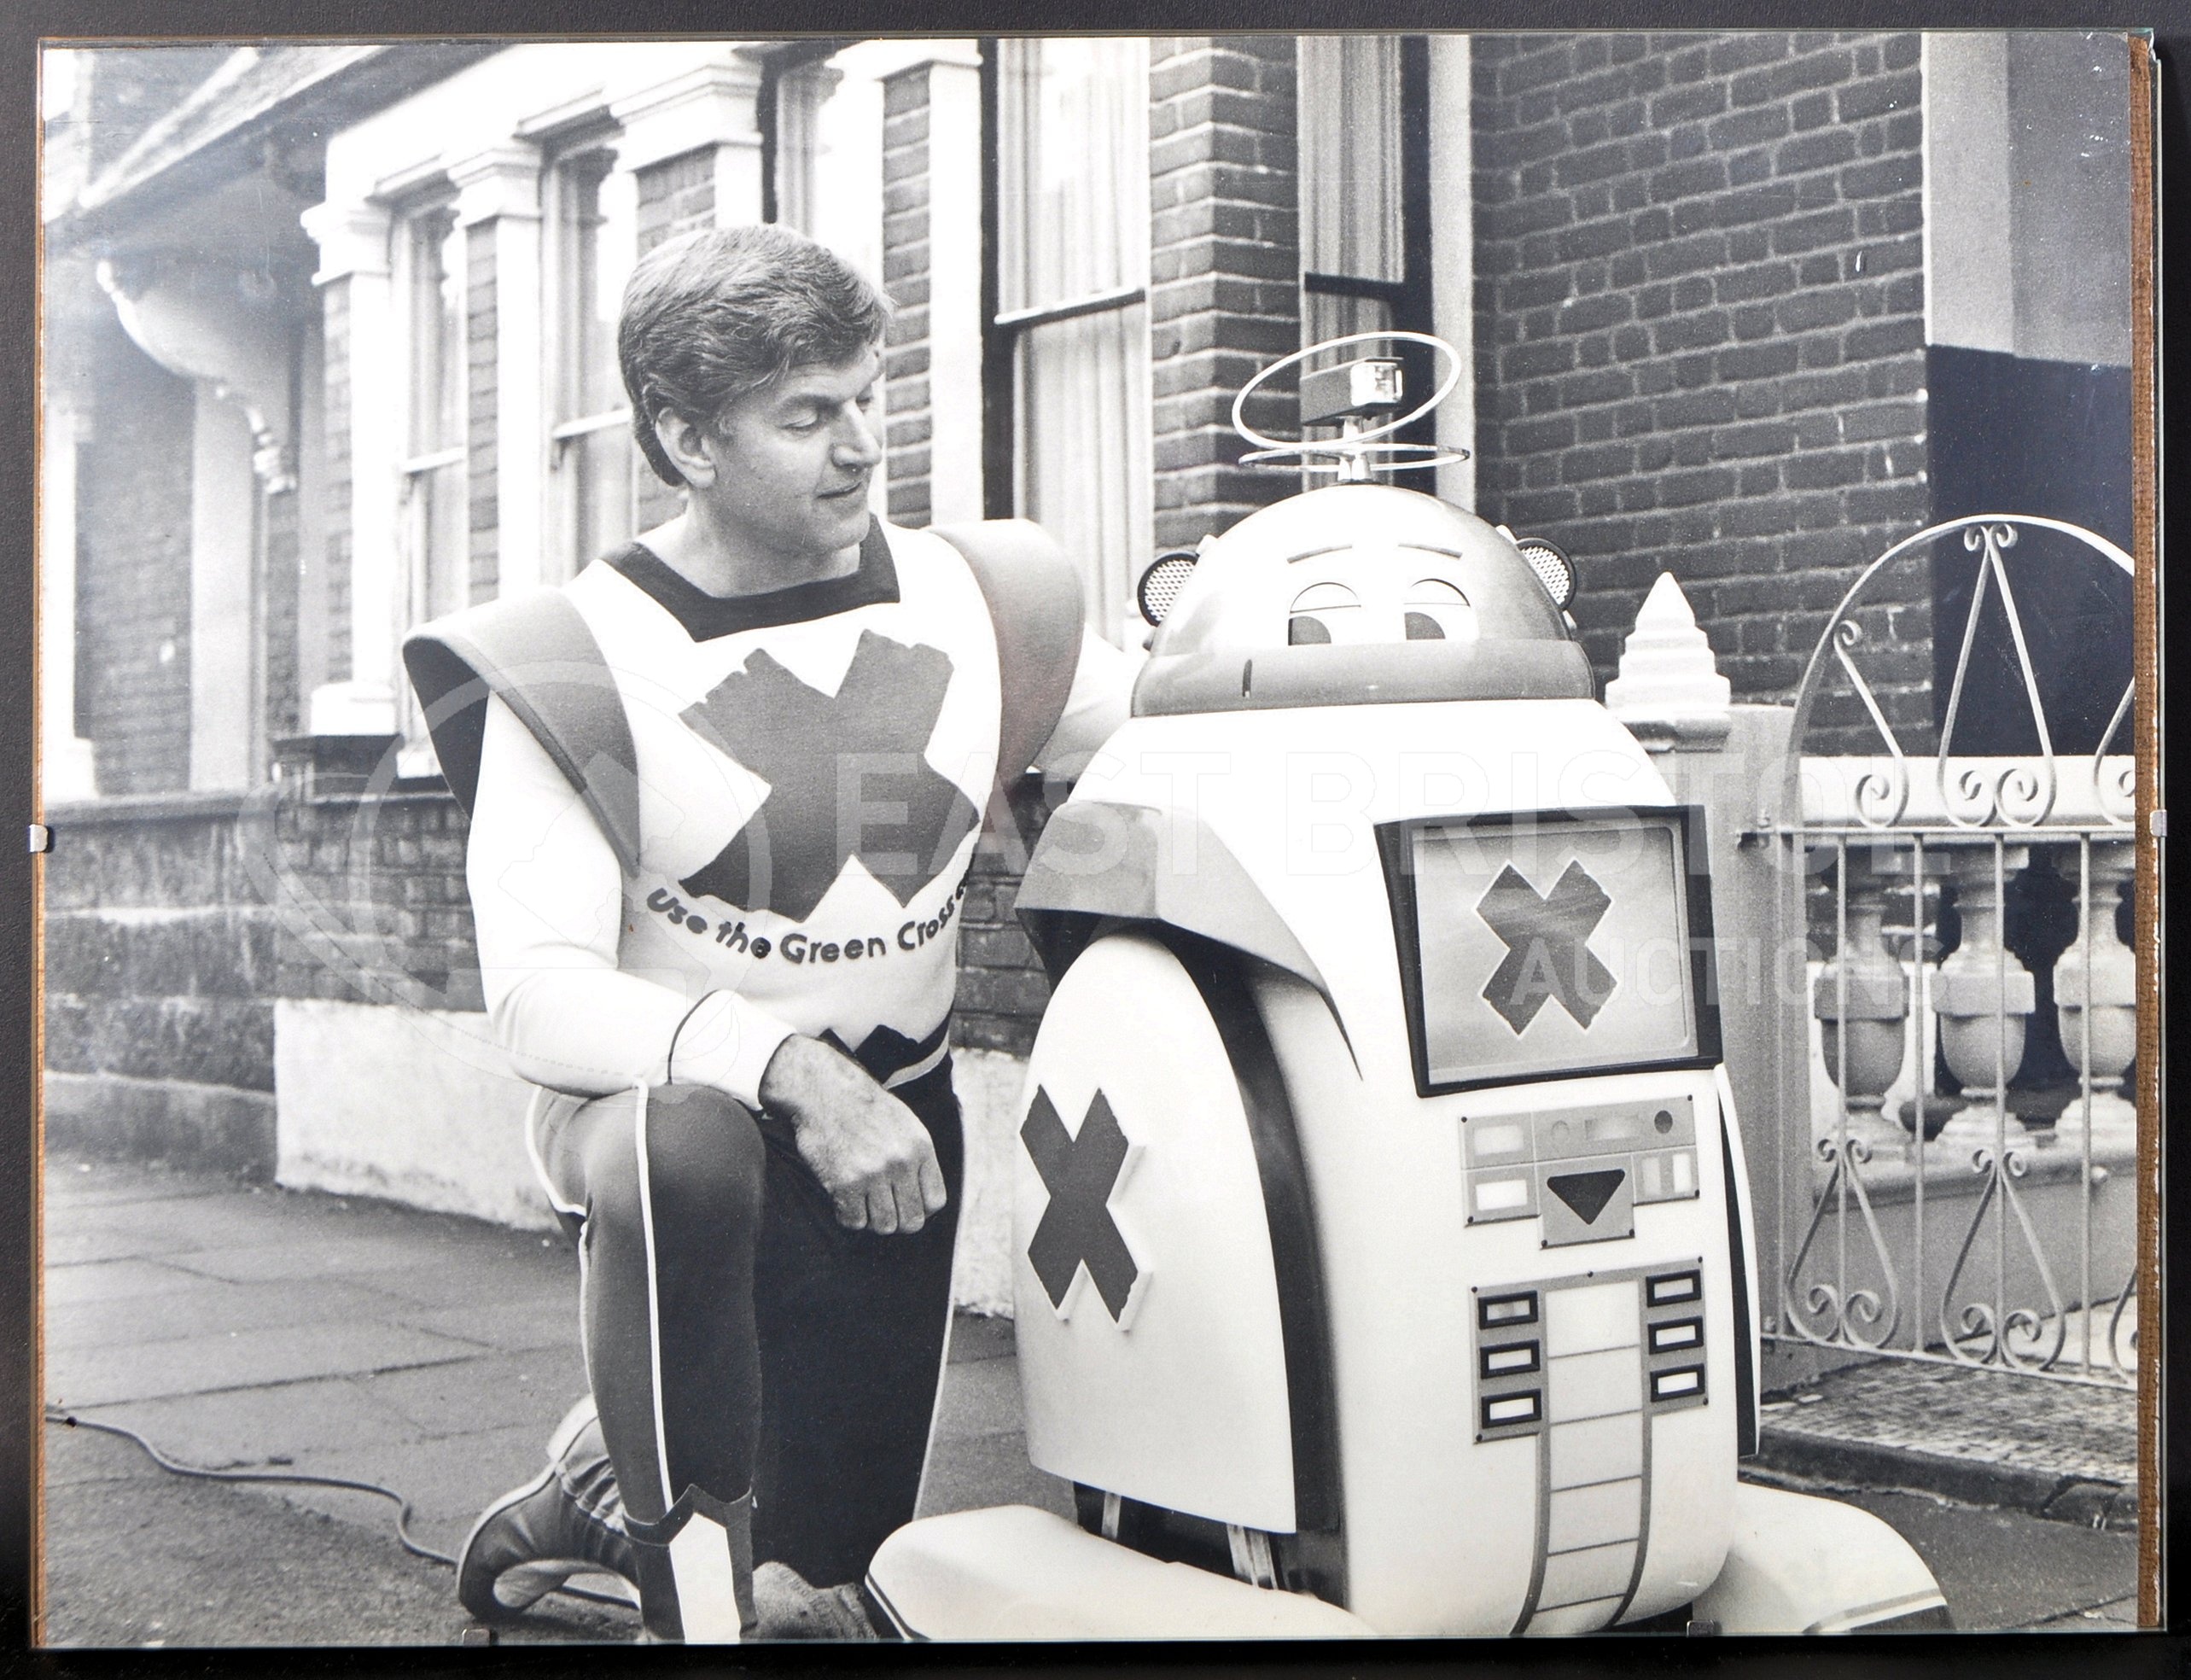 ESTATE OF DAVE PROWSE - GREEN CROSS CODE - LARGE PUBLICITY IMAGE